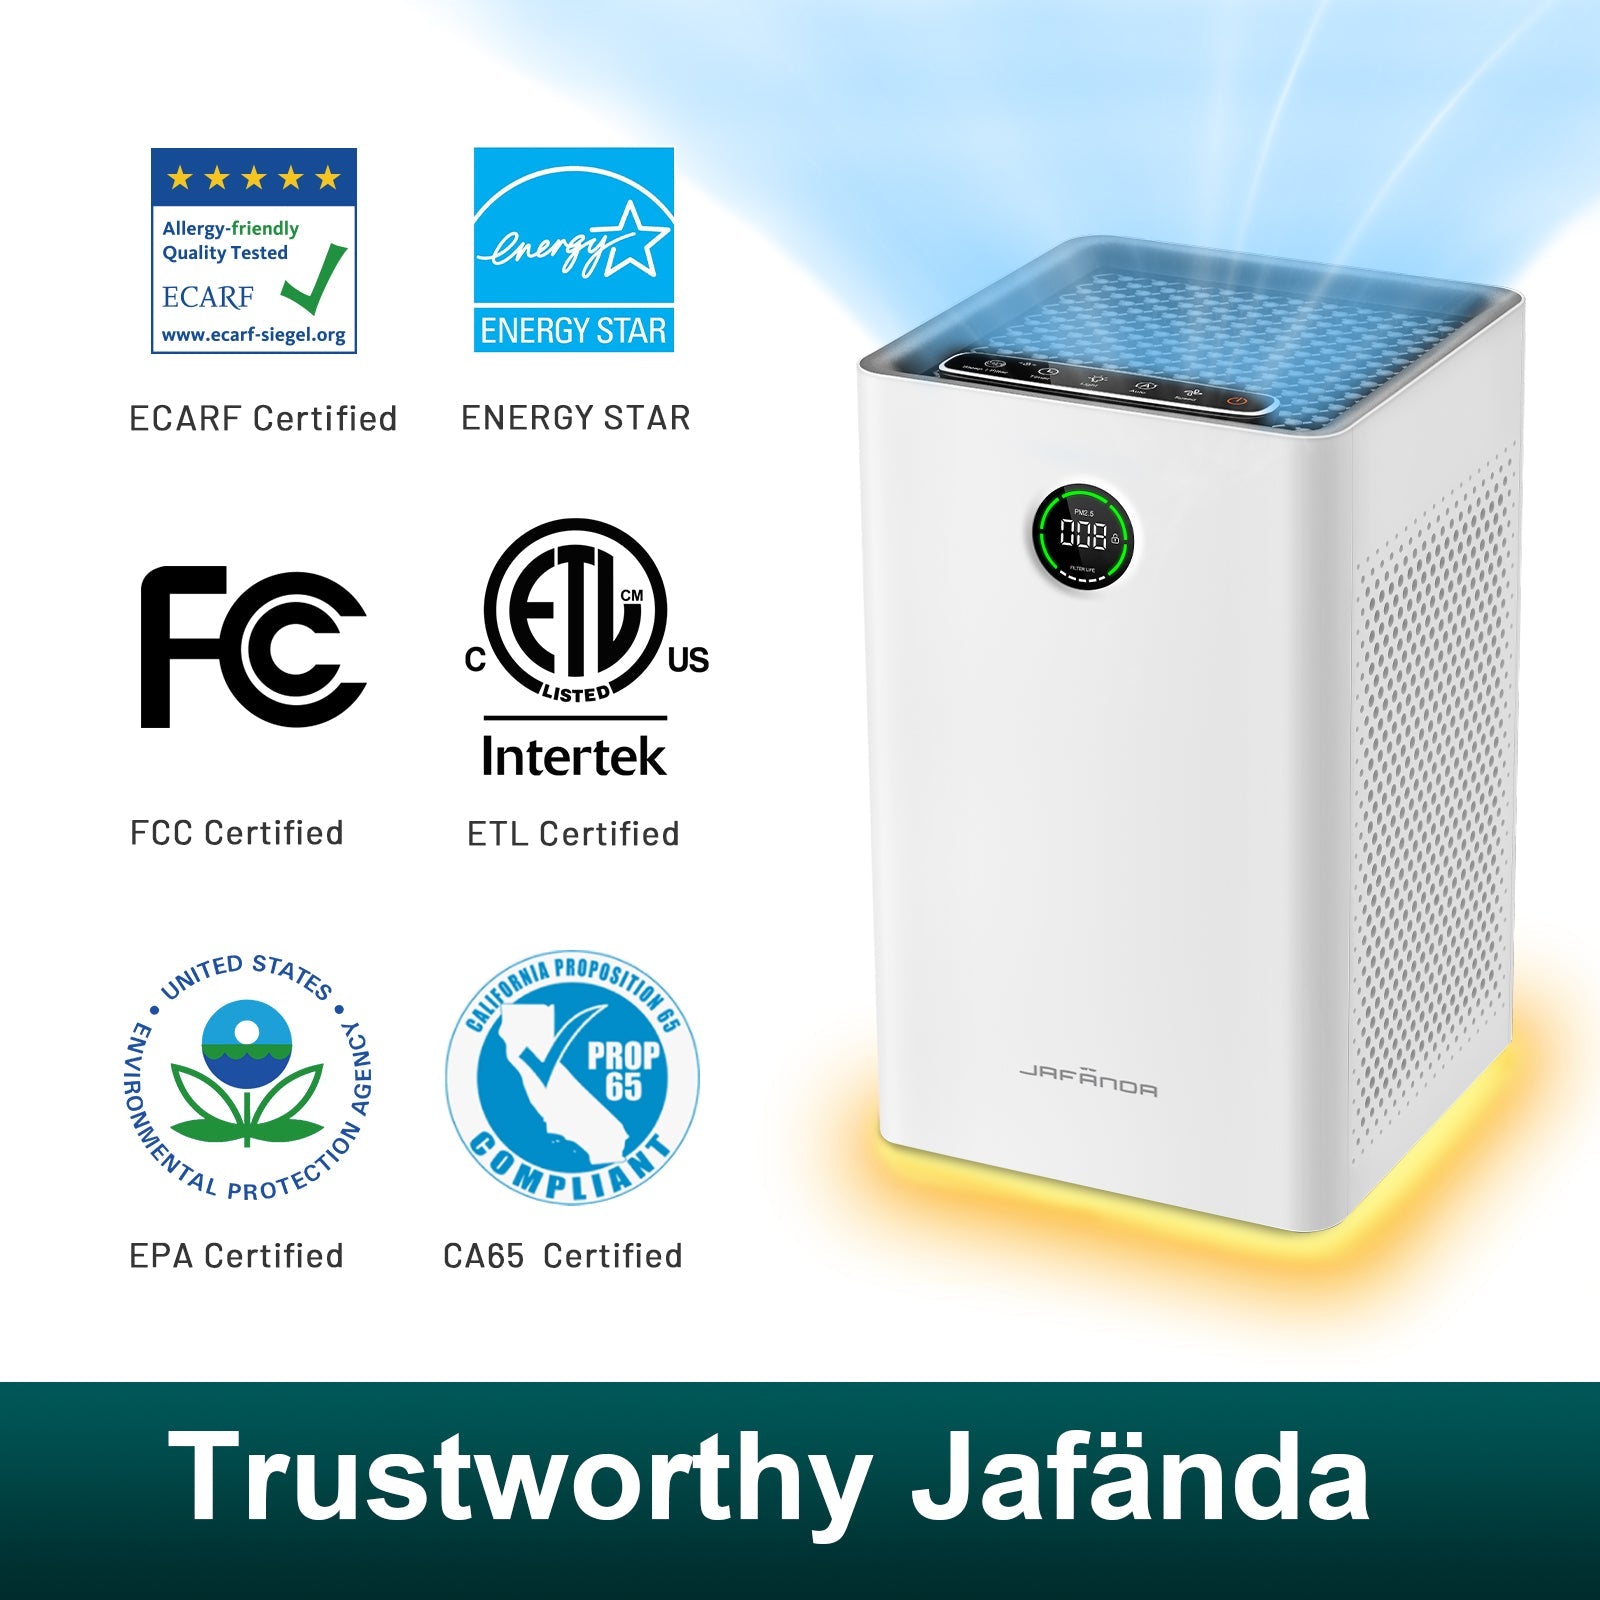 Jafanda Air Purifier for Large Rooms Up to 1190 sq ft, Dual HEPA & Carbon Filters, Air Cleaner Removes Allergens, Dust, Pollen, Smoke, Odors, Pet Dander - PM2.5 Monitor & Night Light - Jafanda